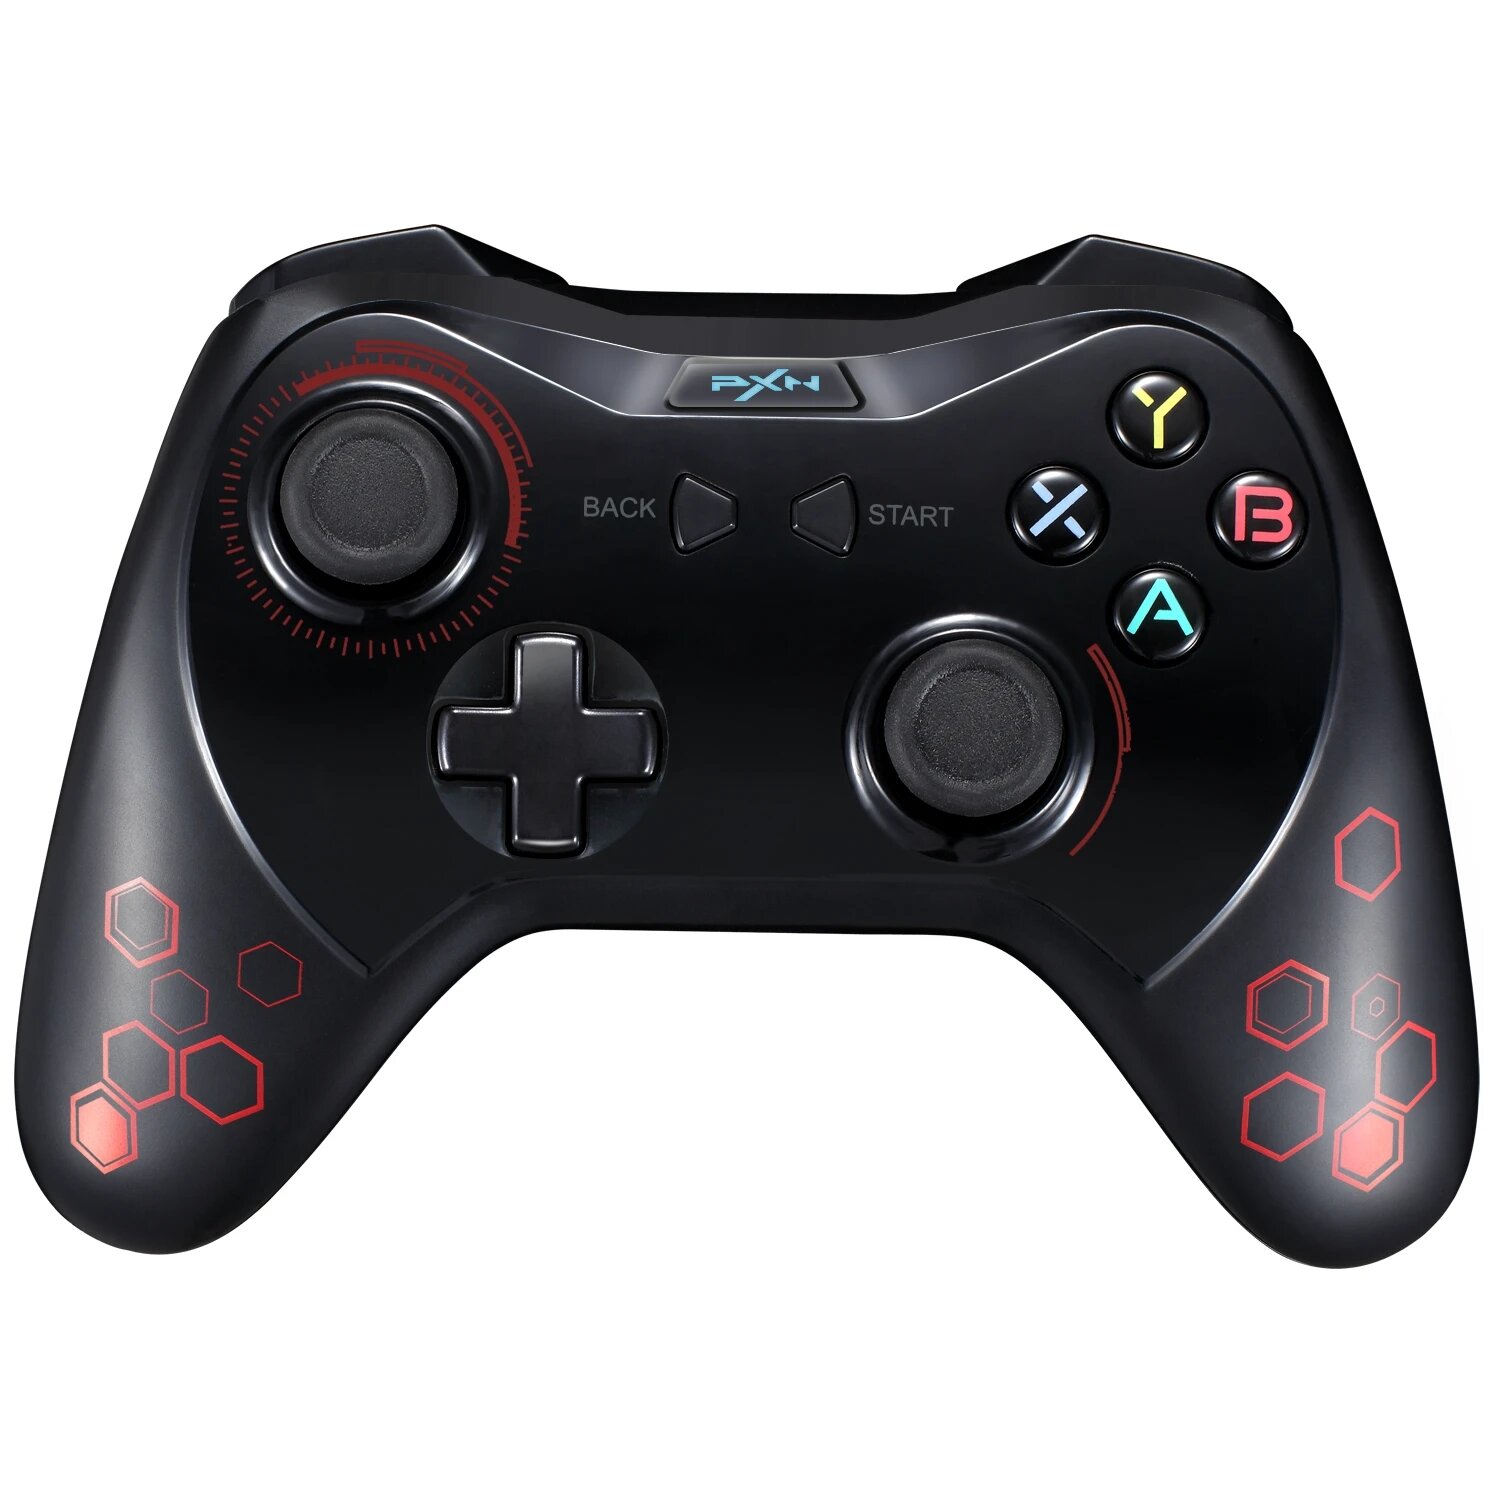 PXN-9606 Bluetooth 4.0 oplaadbare gamepad met mobiele telefoonclip Android Mapping Activator voor mo